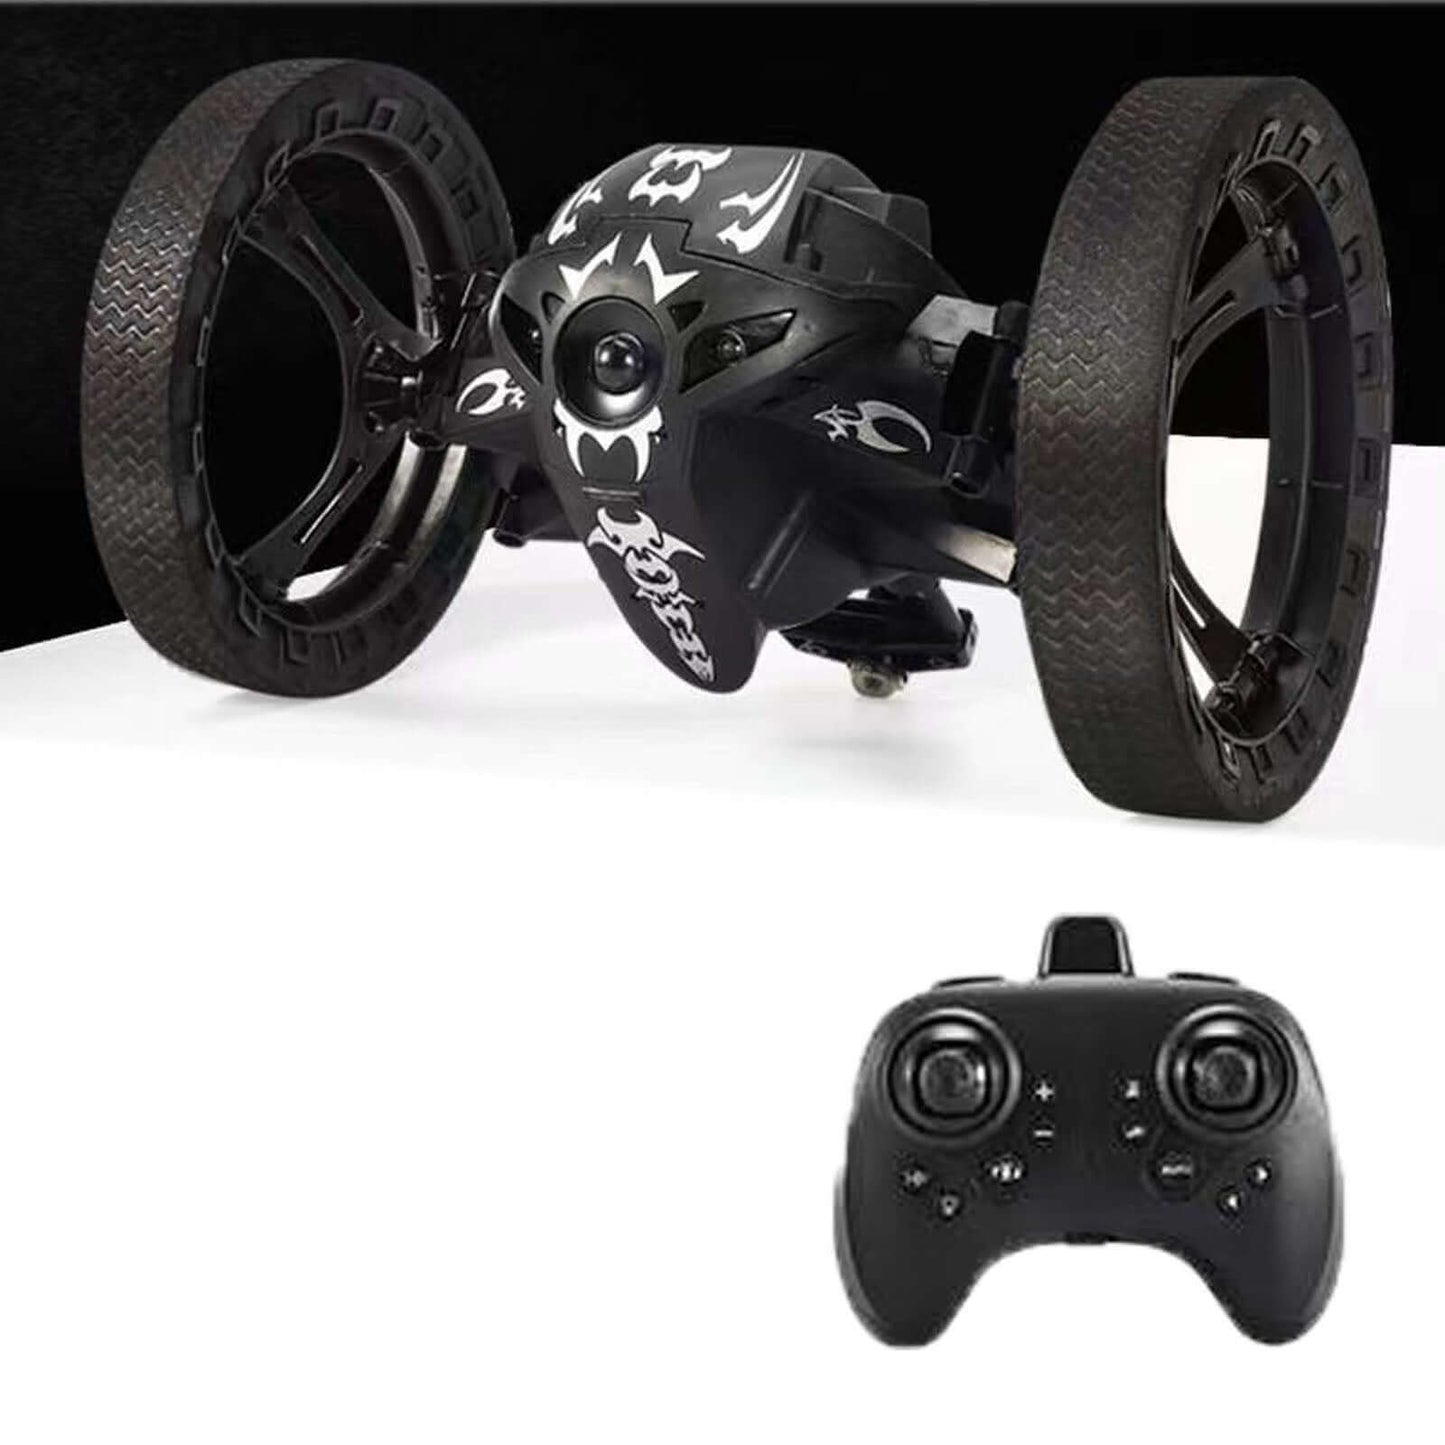 RC Car with Camera - WiFi Bounce Car with HD 2.0MP Camera and Flexible Wheels - Peg SJ88 4CH 2.4GHz Jumping Sumo - KidsToyLover